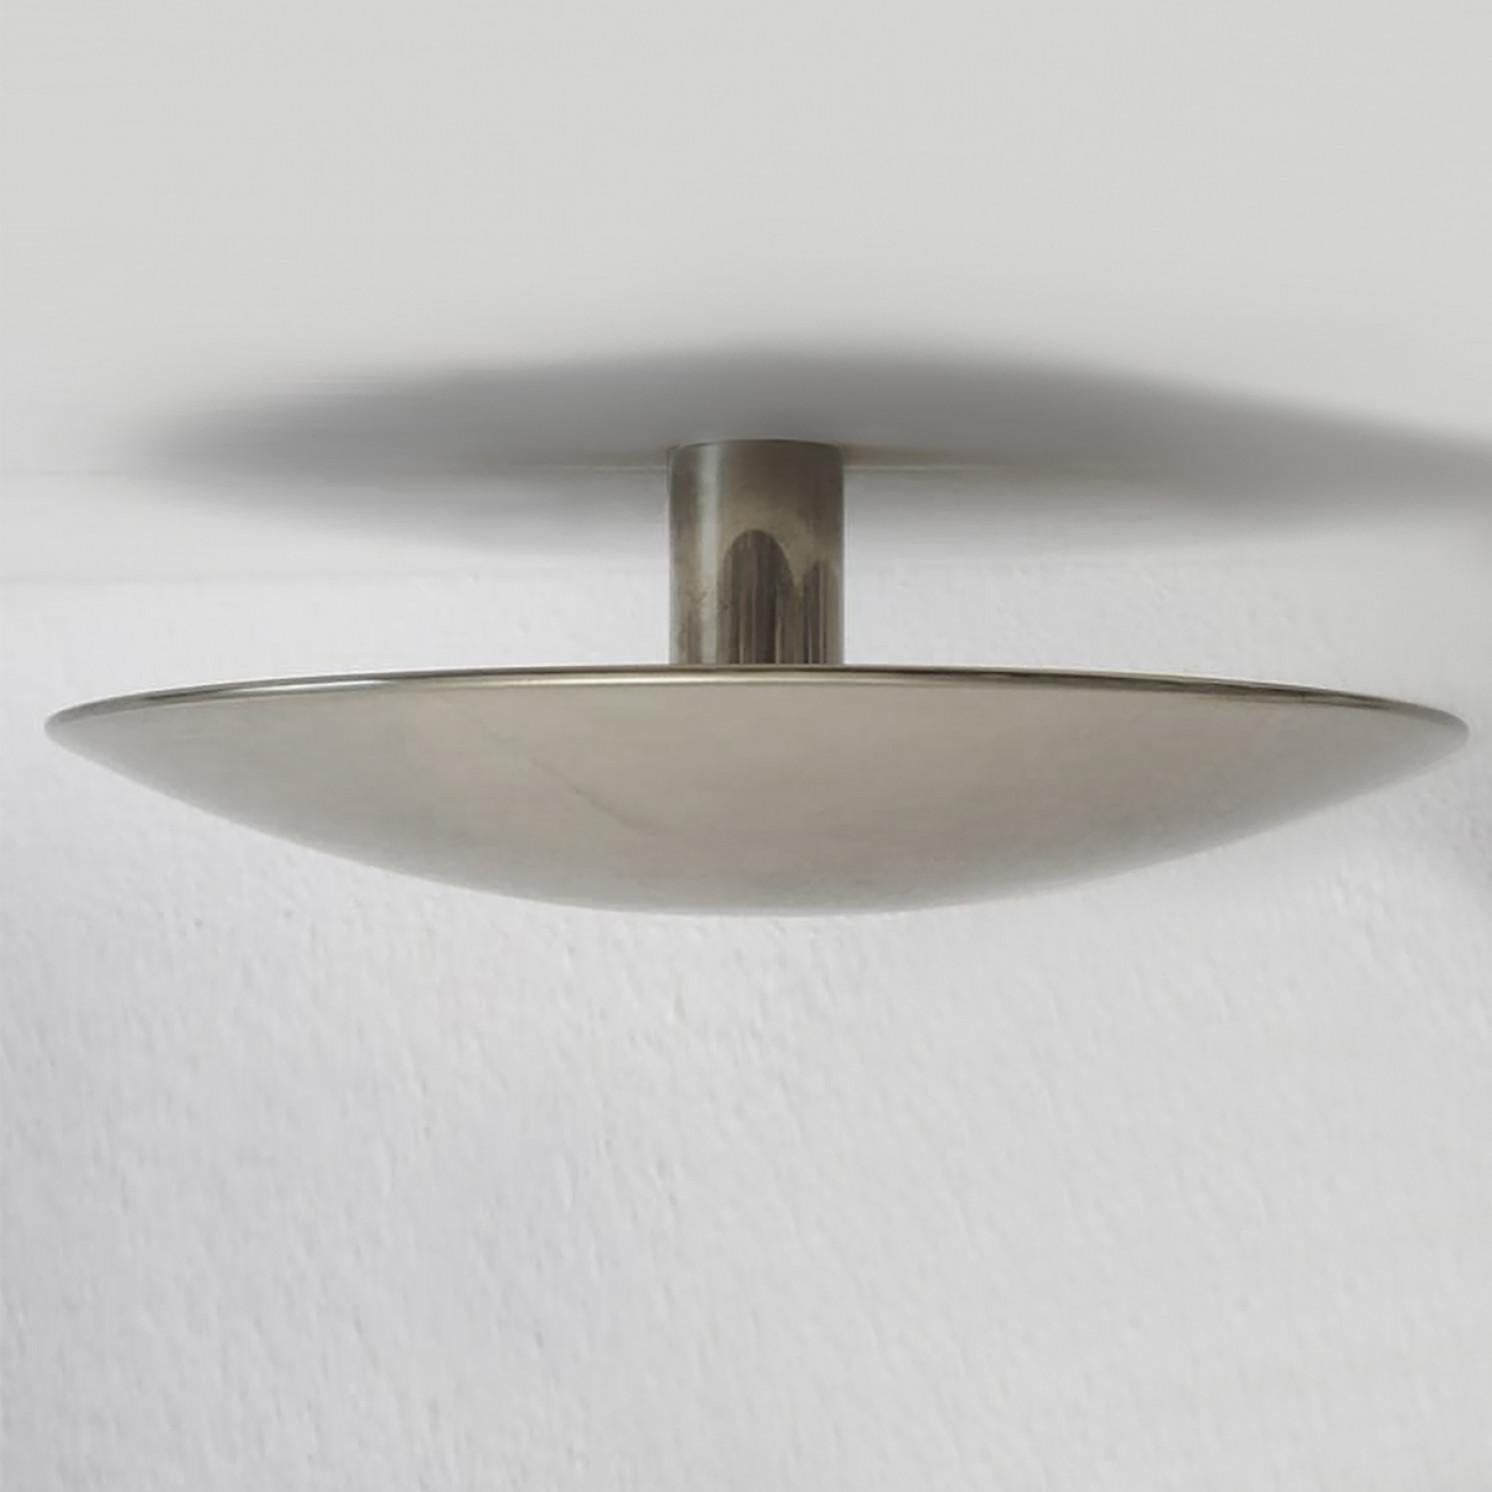 1 of the 2 Florian Schulz Nickel Plated Flush Mount Ceiling / Wall Lights For Sale 1